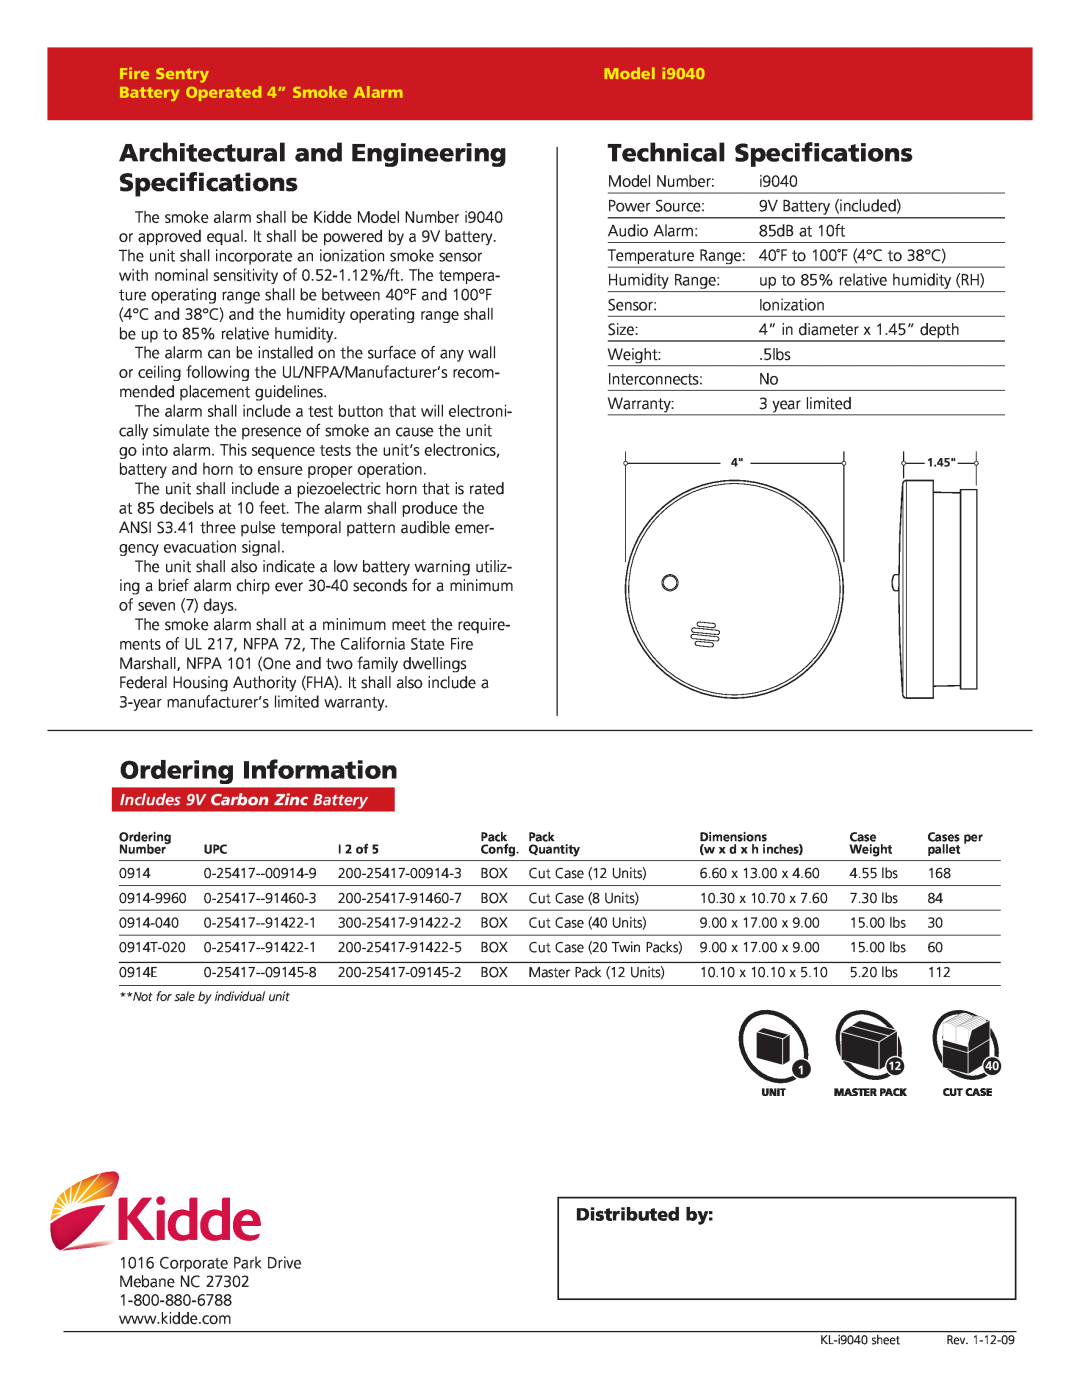 Kidde I9040 warranty Architectural and Engineering Specifications, Technical Specifications, Ordering Information, Model 